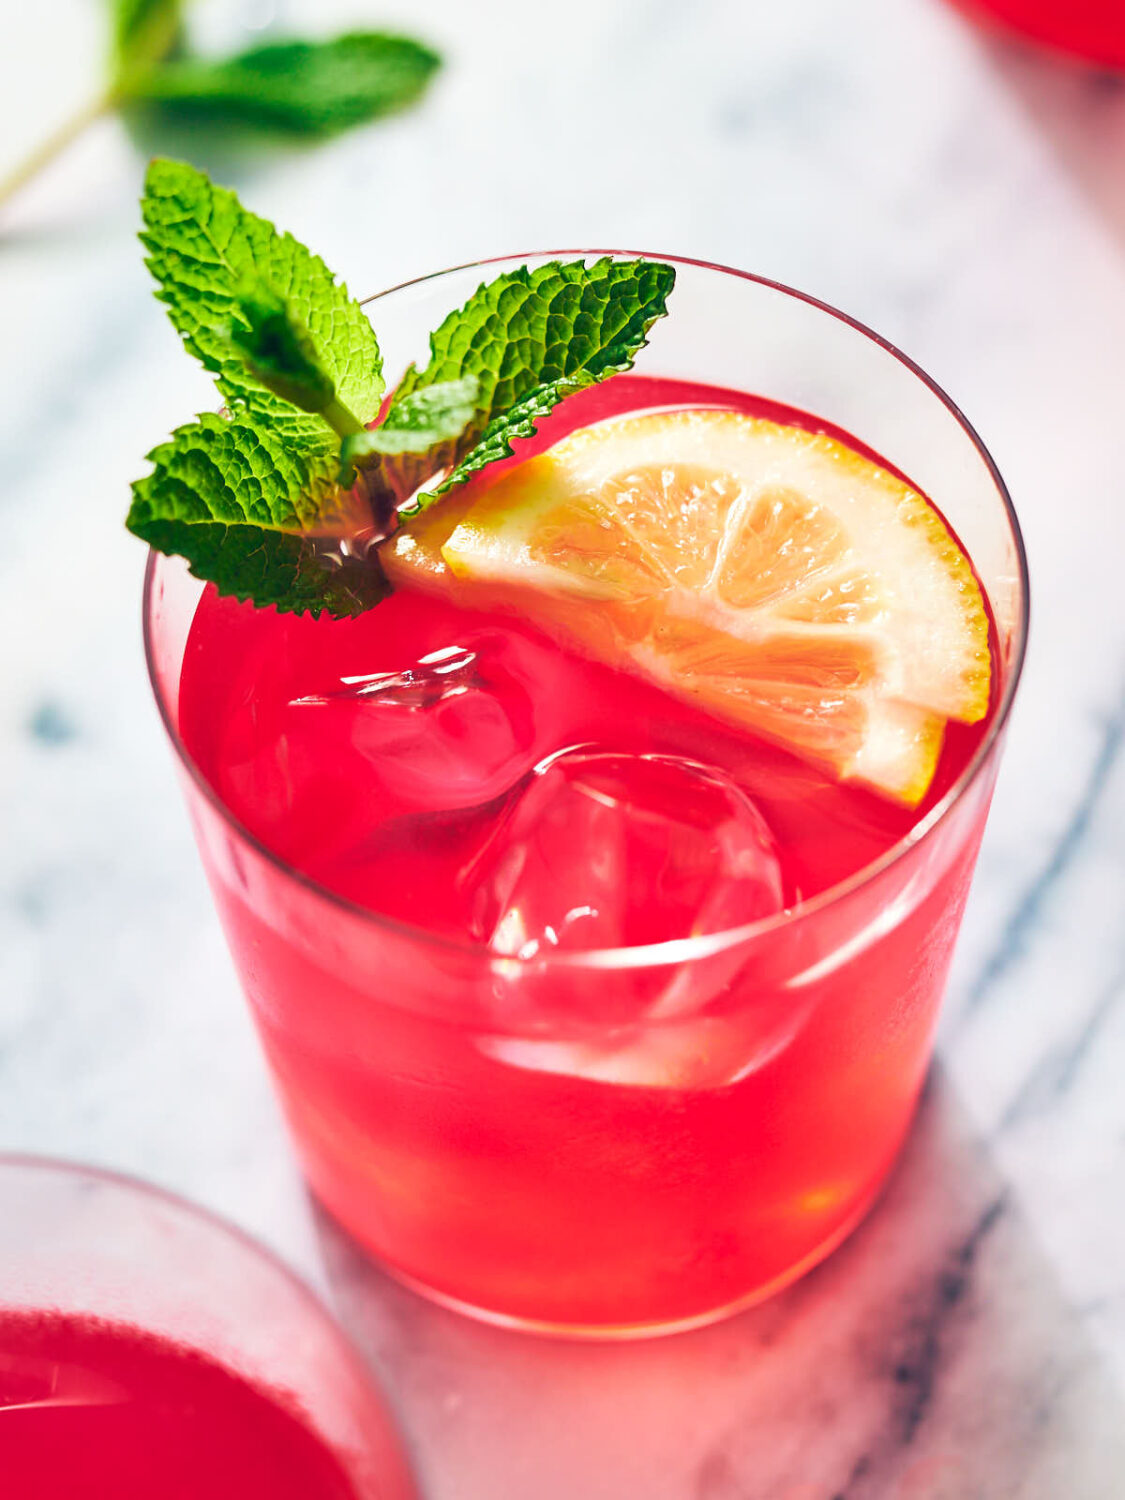 Hibiscus lemonade in a glass with ice, lemon, and mint.